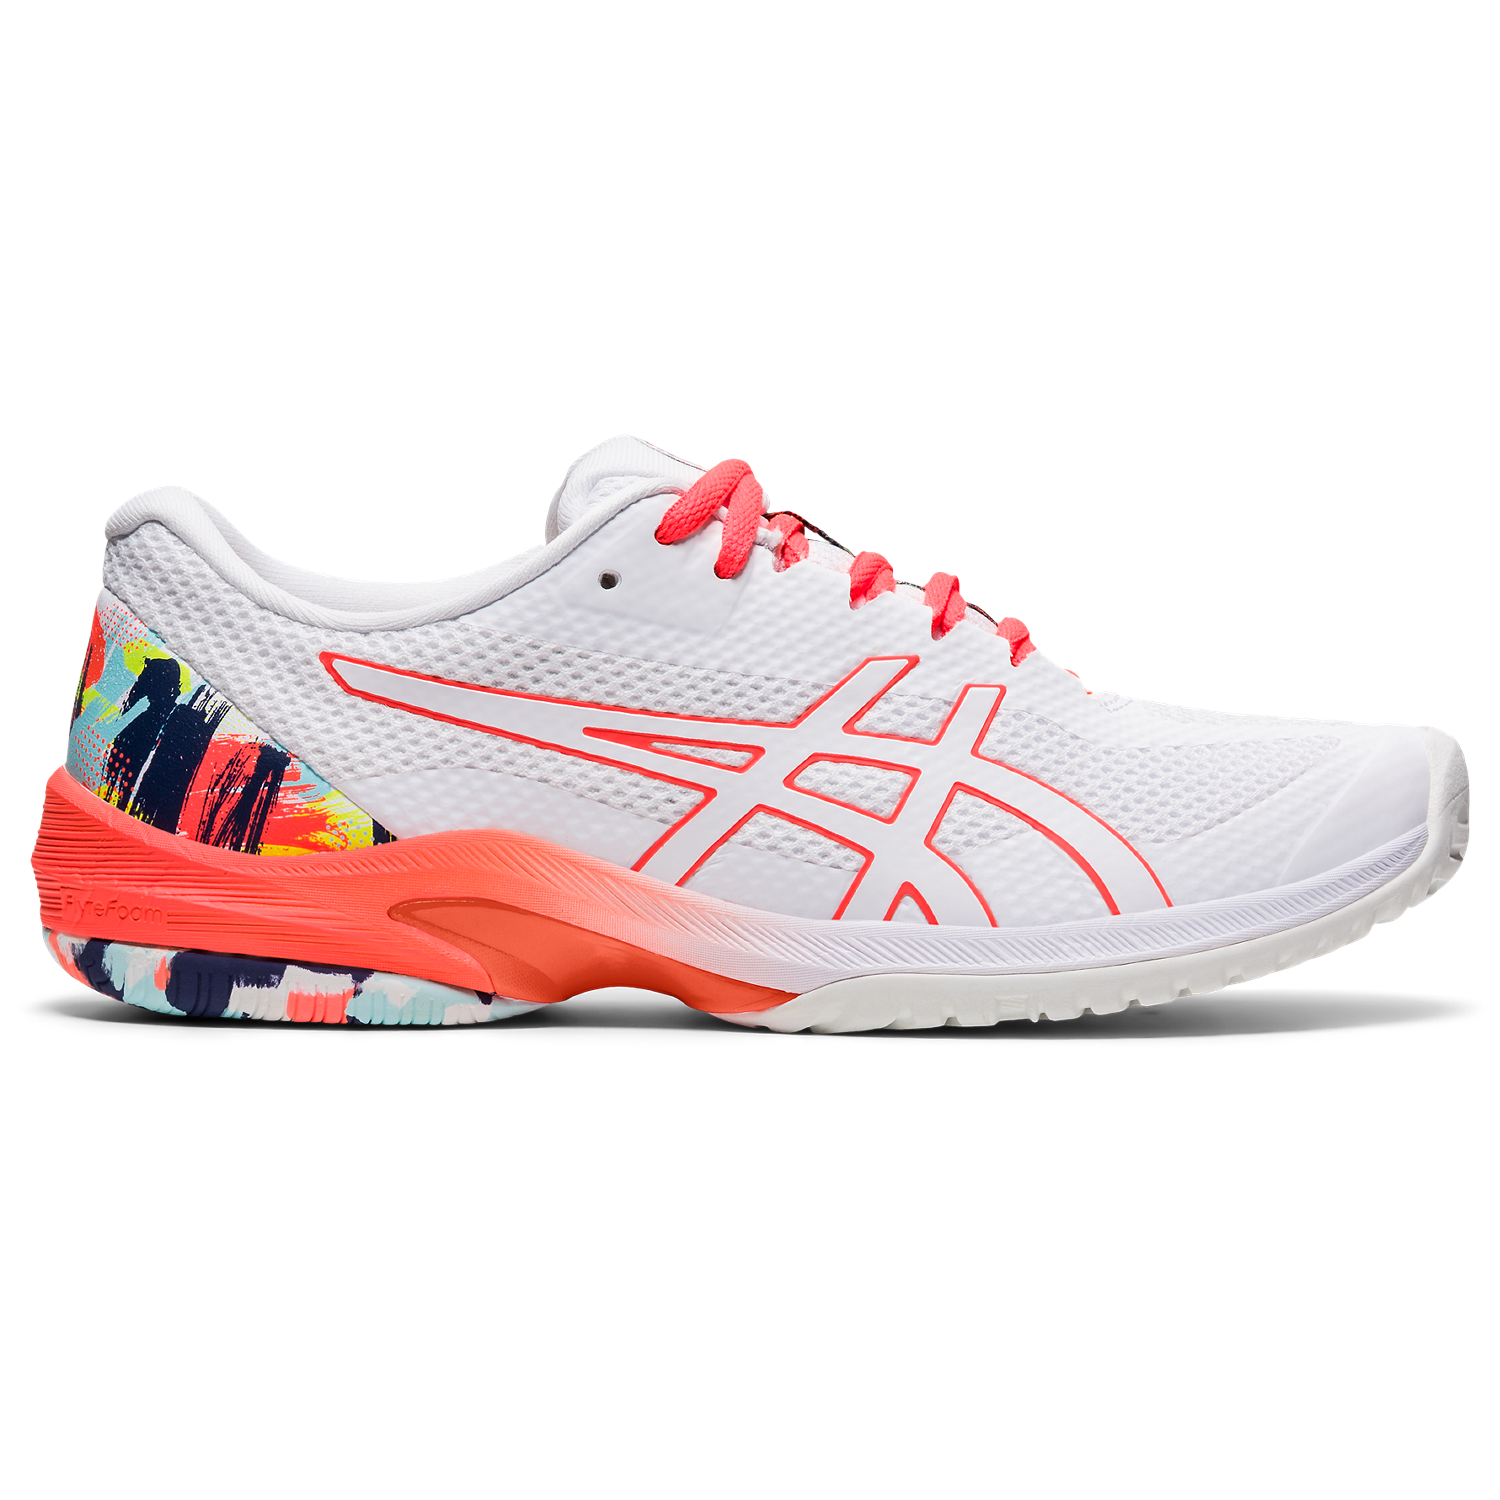 CHAUSSURES FEMME ASICS COURT FF 3 CLAY